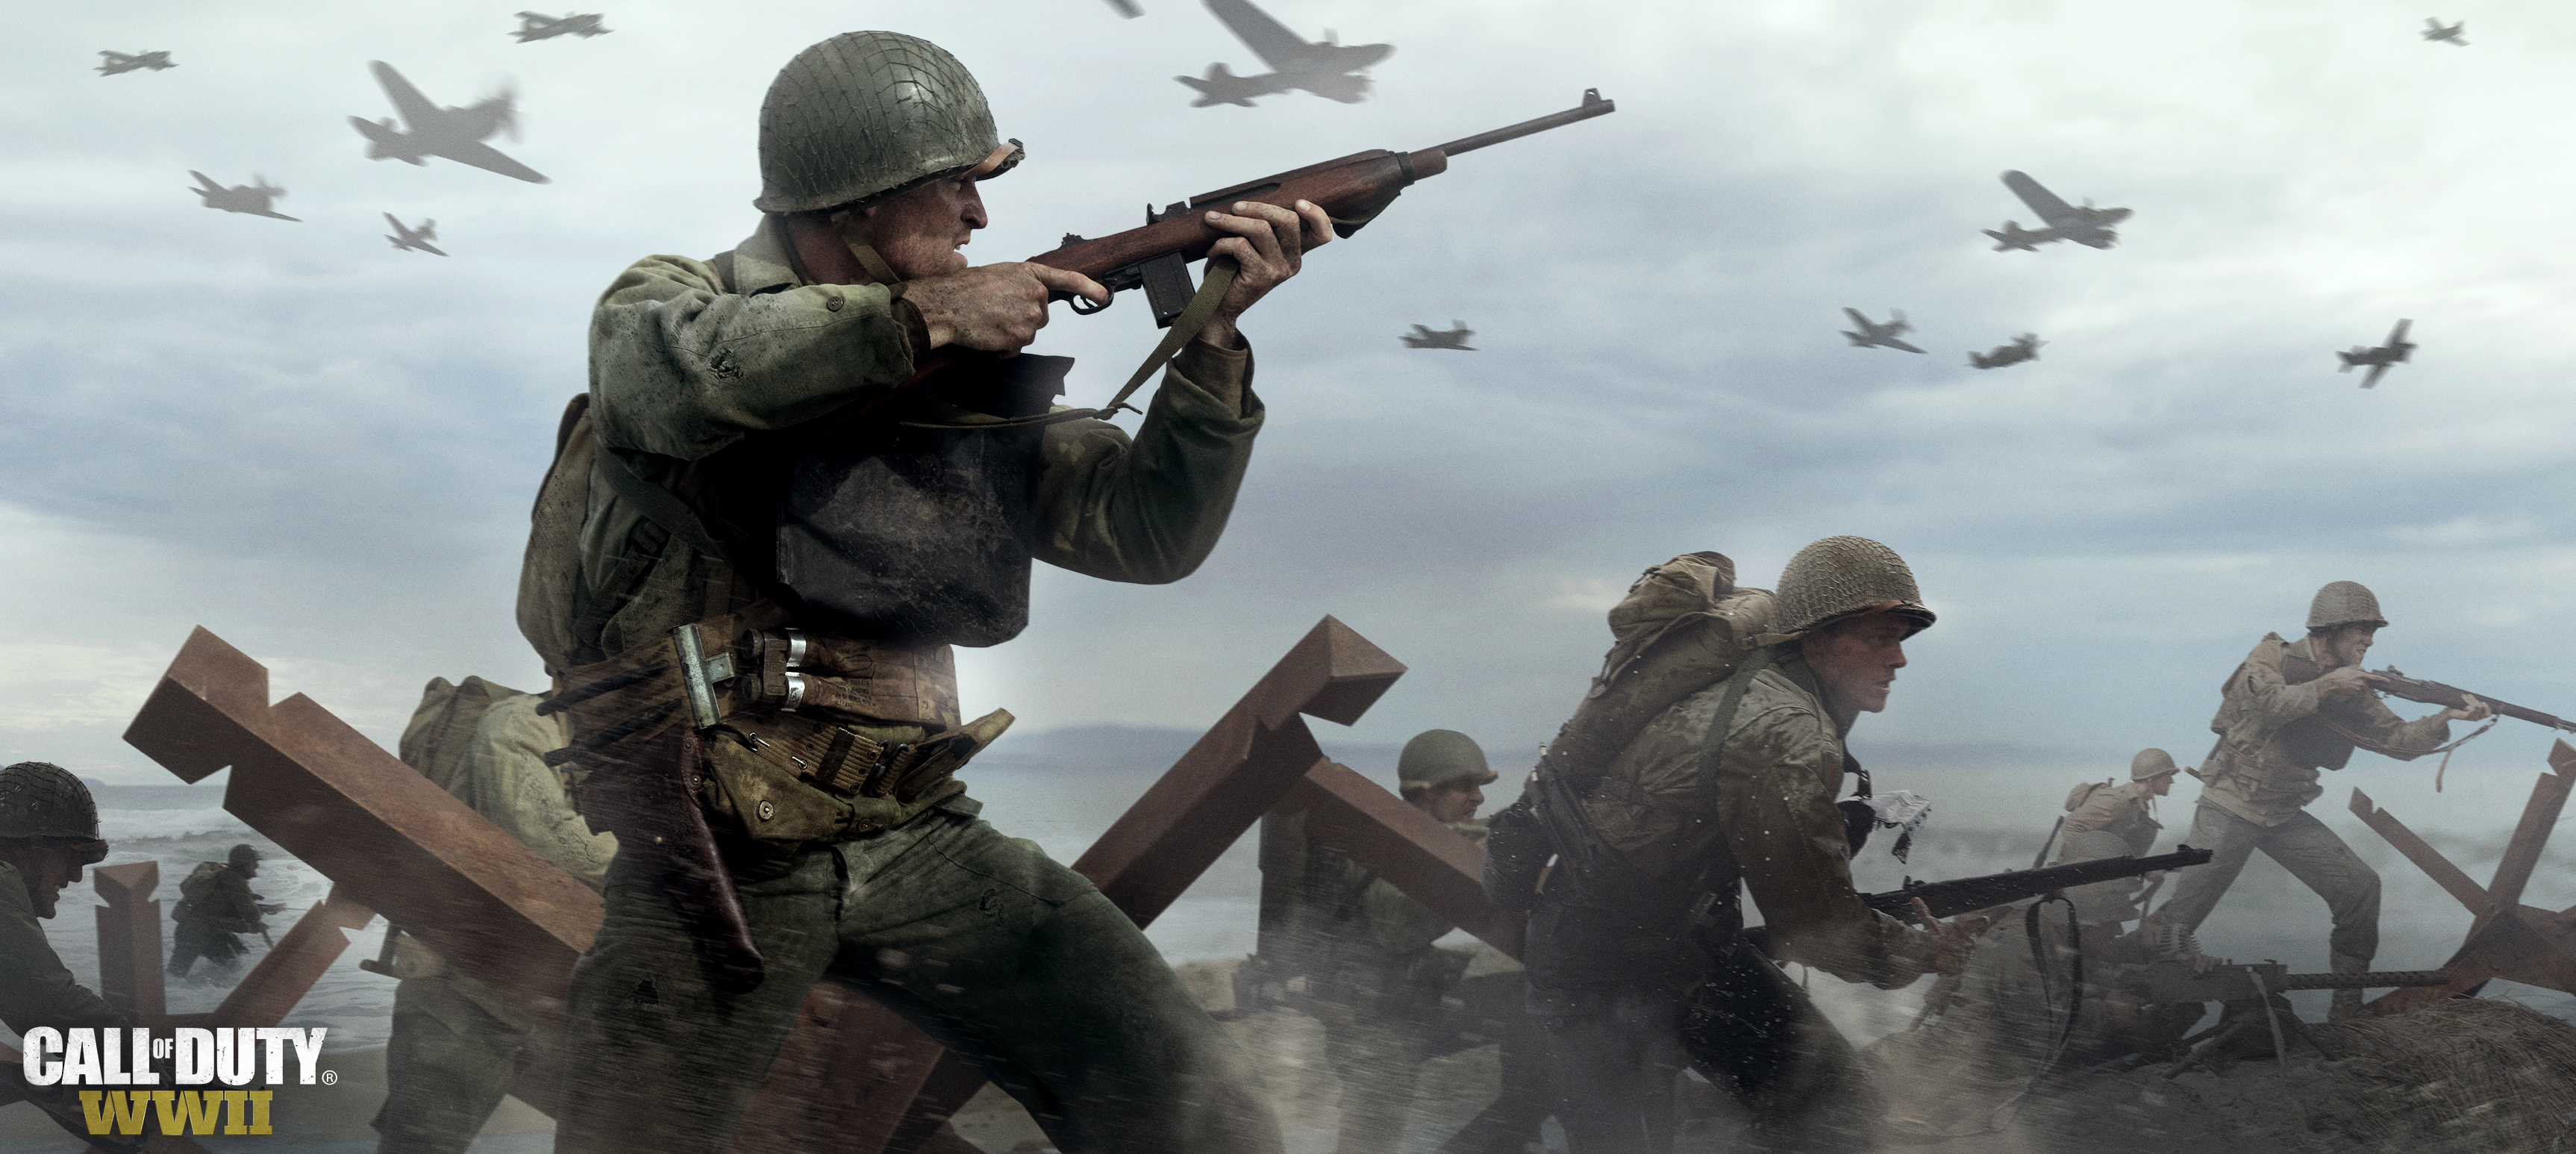 3452x1546 20+ Call of Duty: WWII HD Wallpapers and Backgrounds